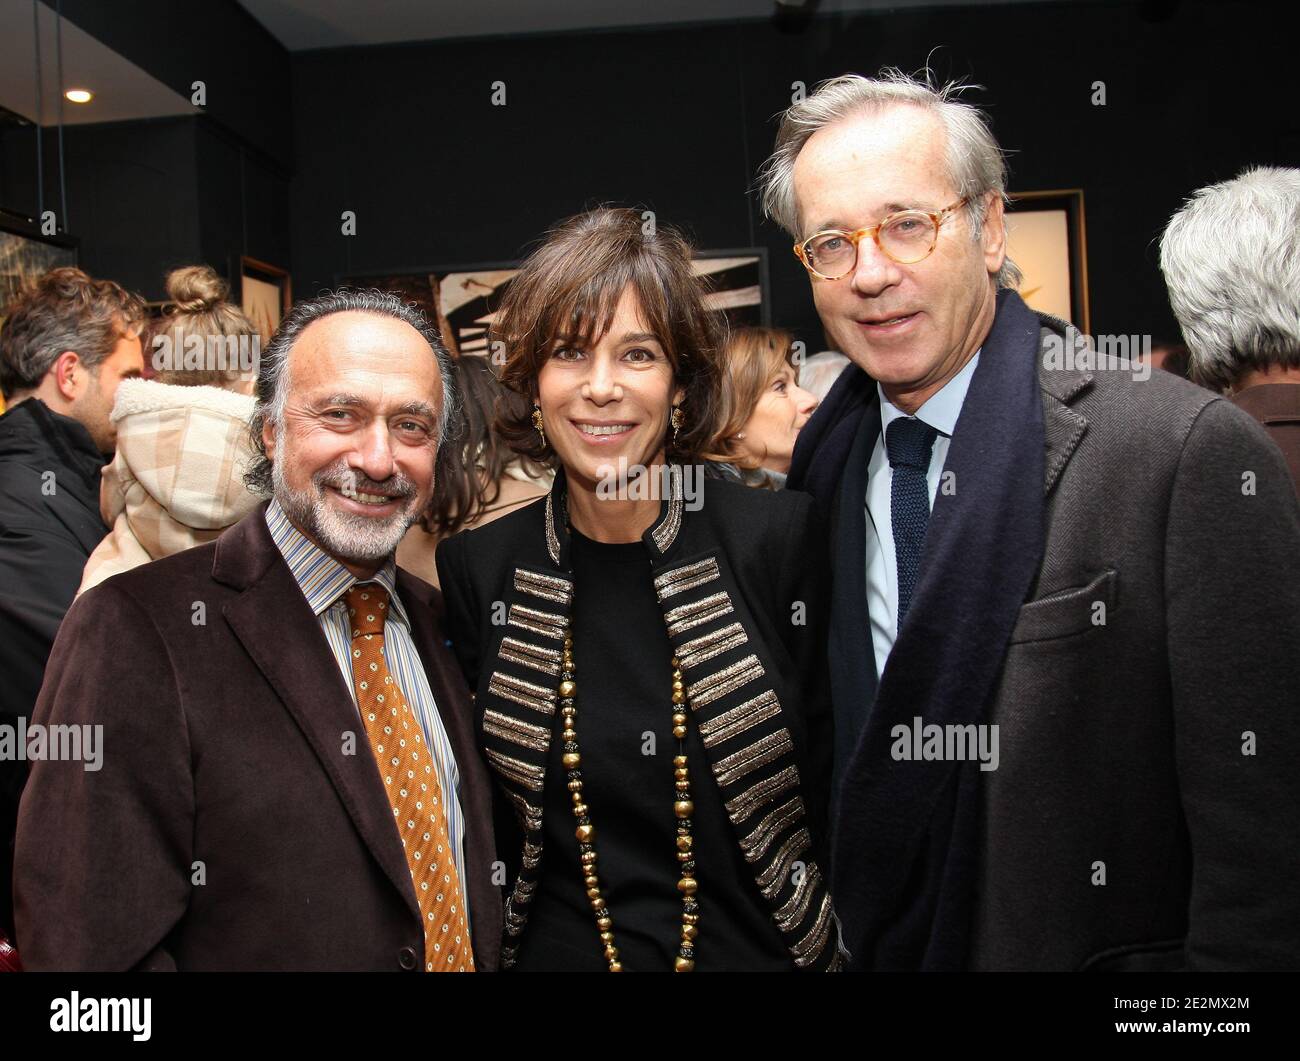 'Olivier Dassault, Christine Orban and Olivier Orban during the exhibition of Michele Morgan's and Olivier Dassault's paintings at the Galerie ''Artiste en Lumiere'' in Paris, France on February 12, 2010. Photo by Marco Vitchi/ABACAPRESS.COM' Stock Photo